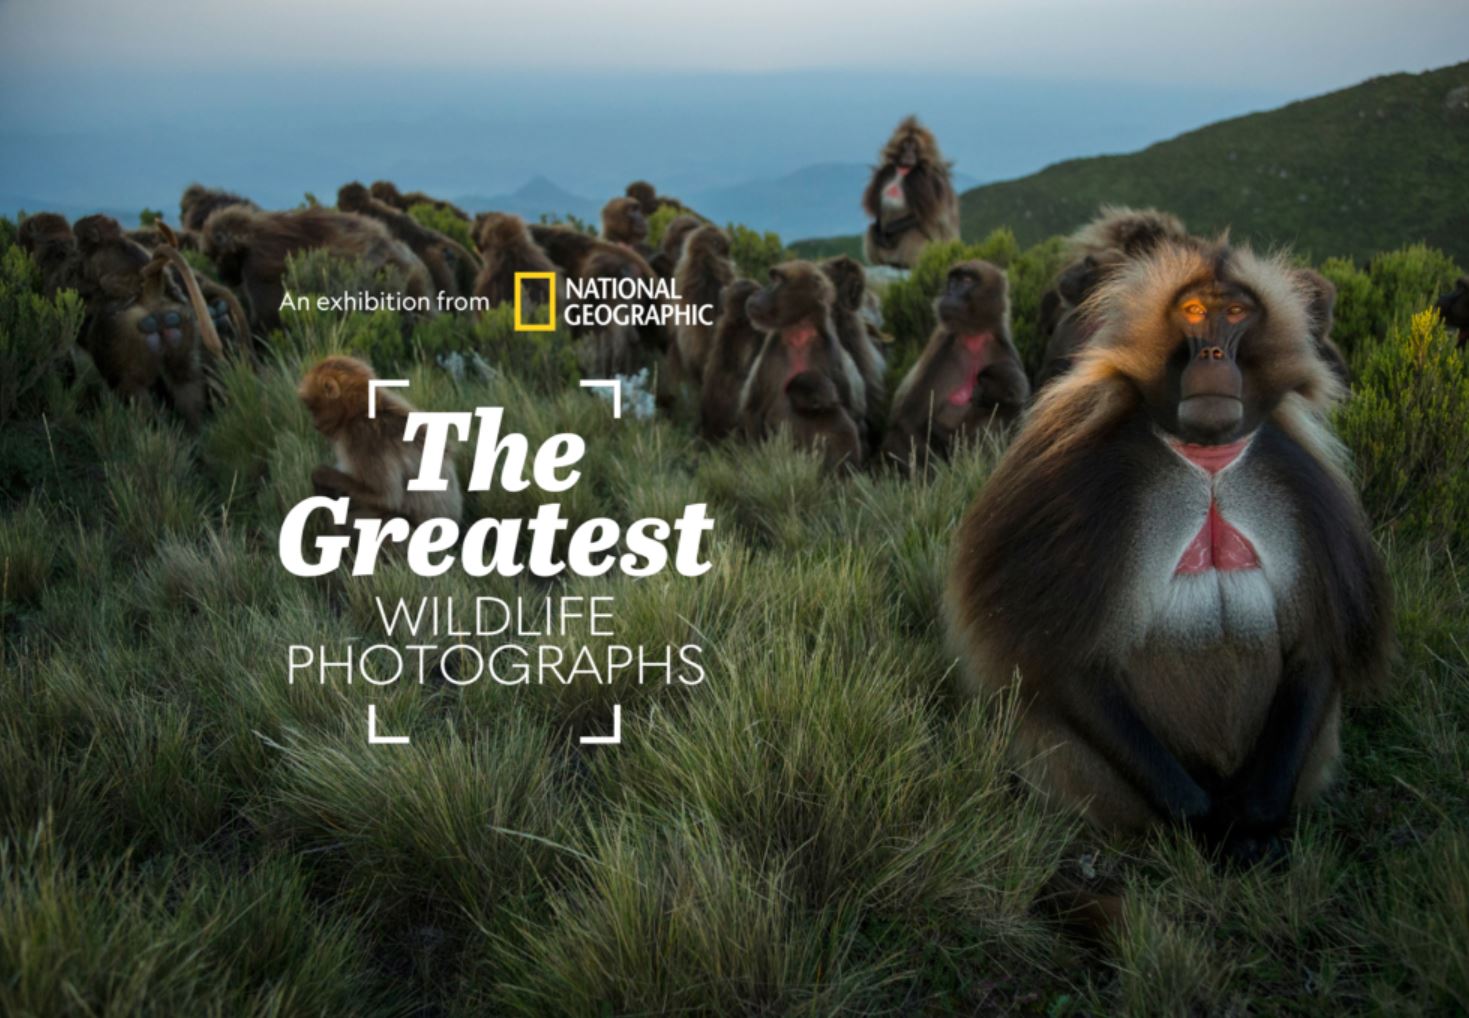 Photo of monkeys with text that says: An exhibition from National Geographic. The greatest wildlife photographs.